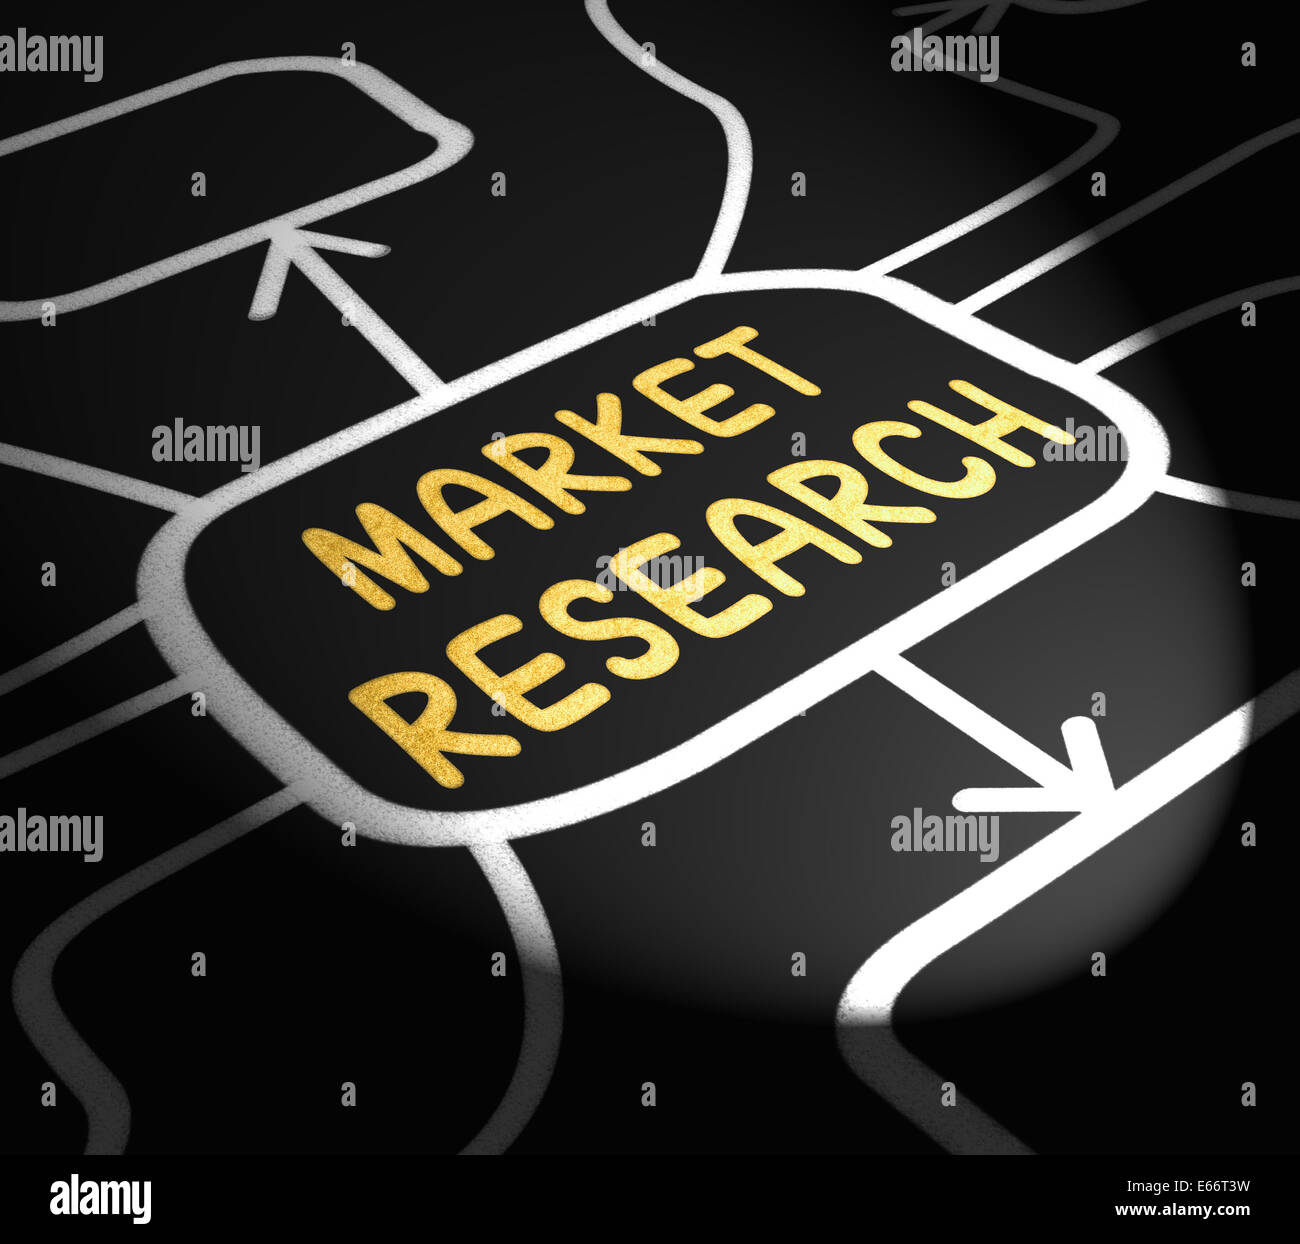 Market Research Arrows Showing Inquiring About Consumers Opinions Stock Photo